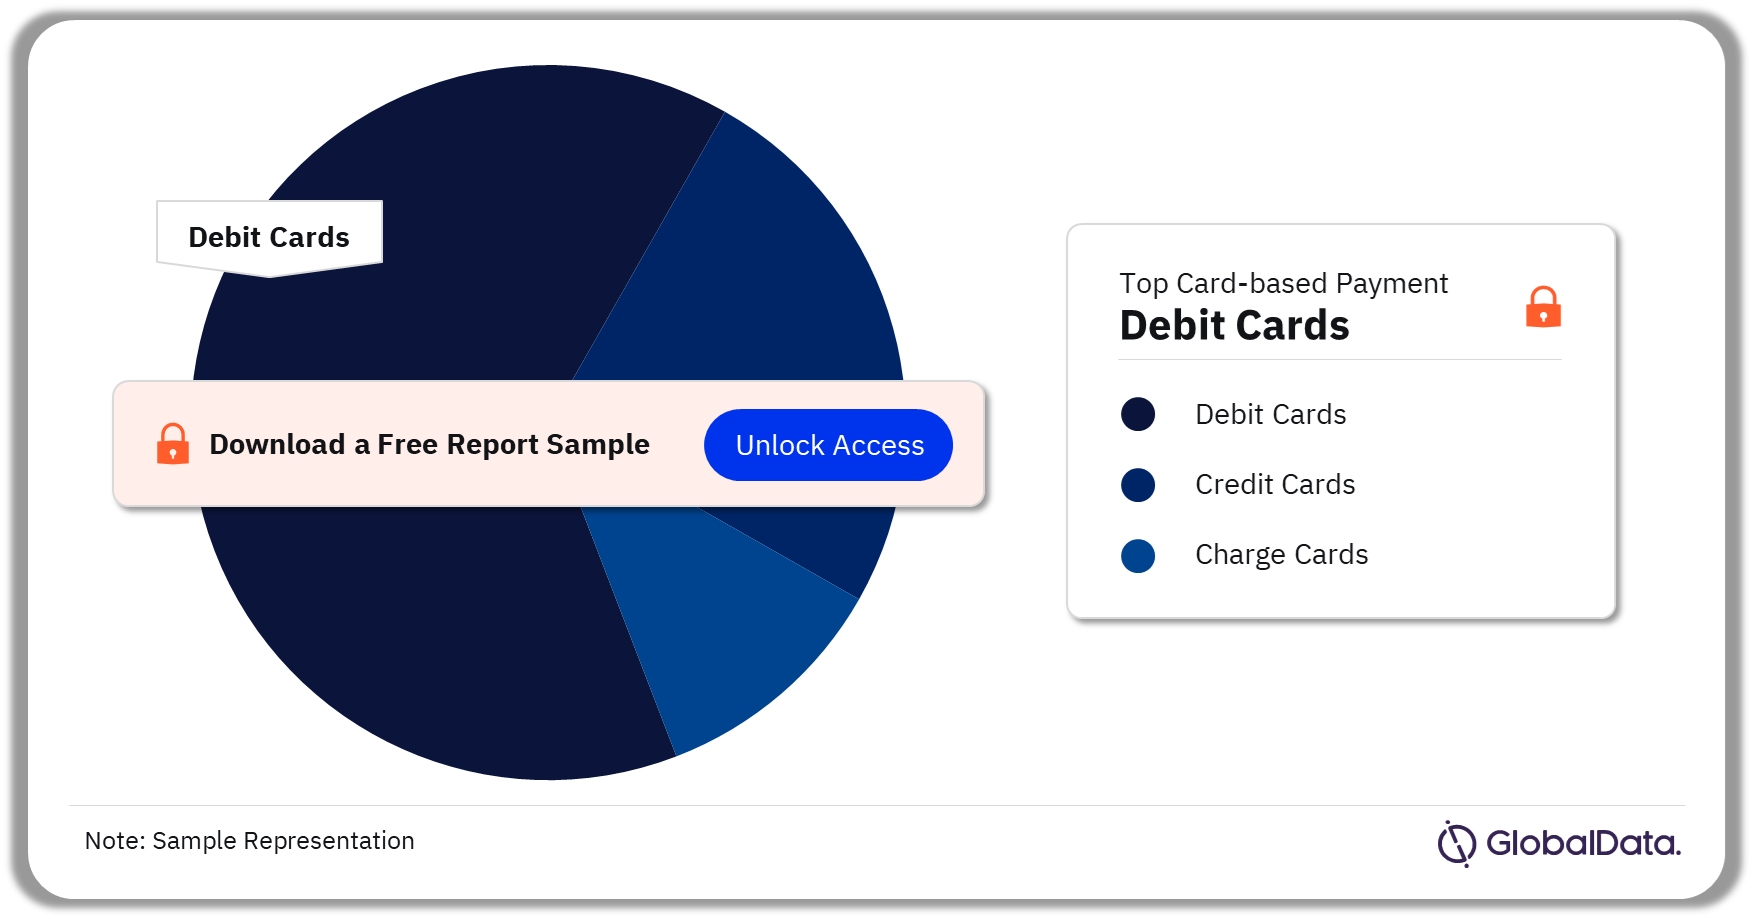 Payment Cards Analysis by Segments, 2023 (%)